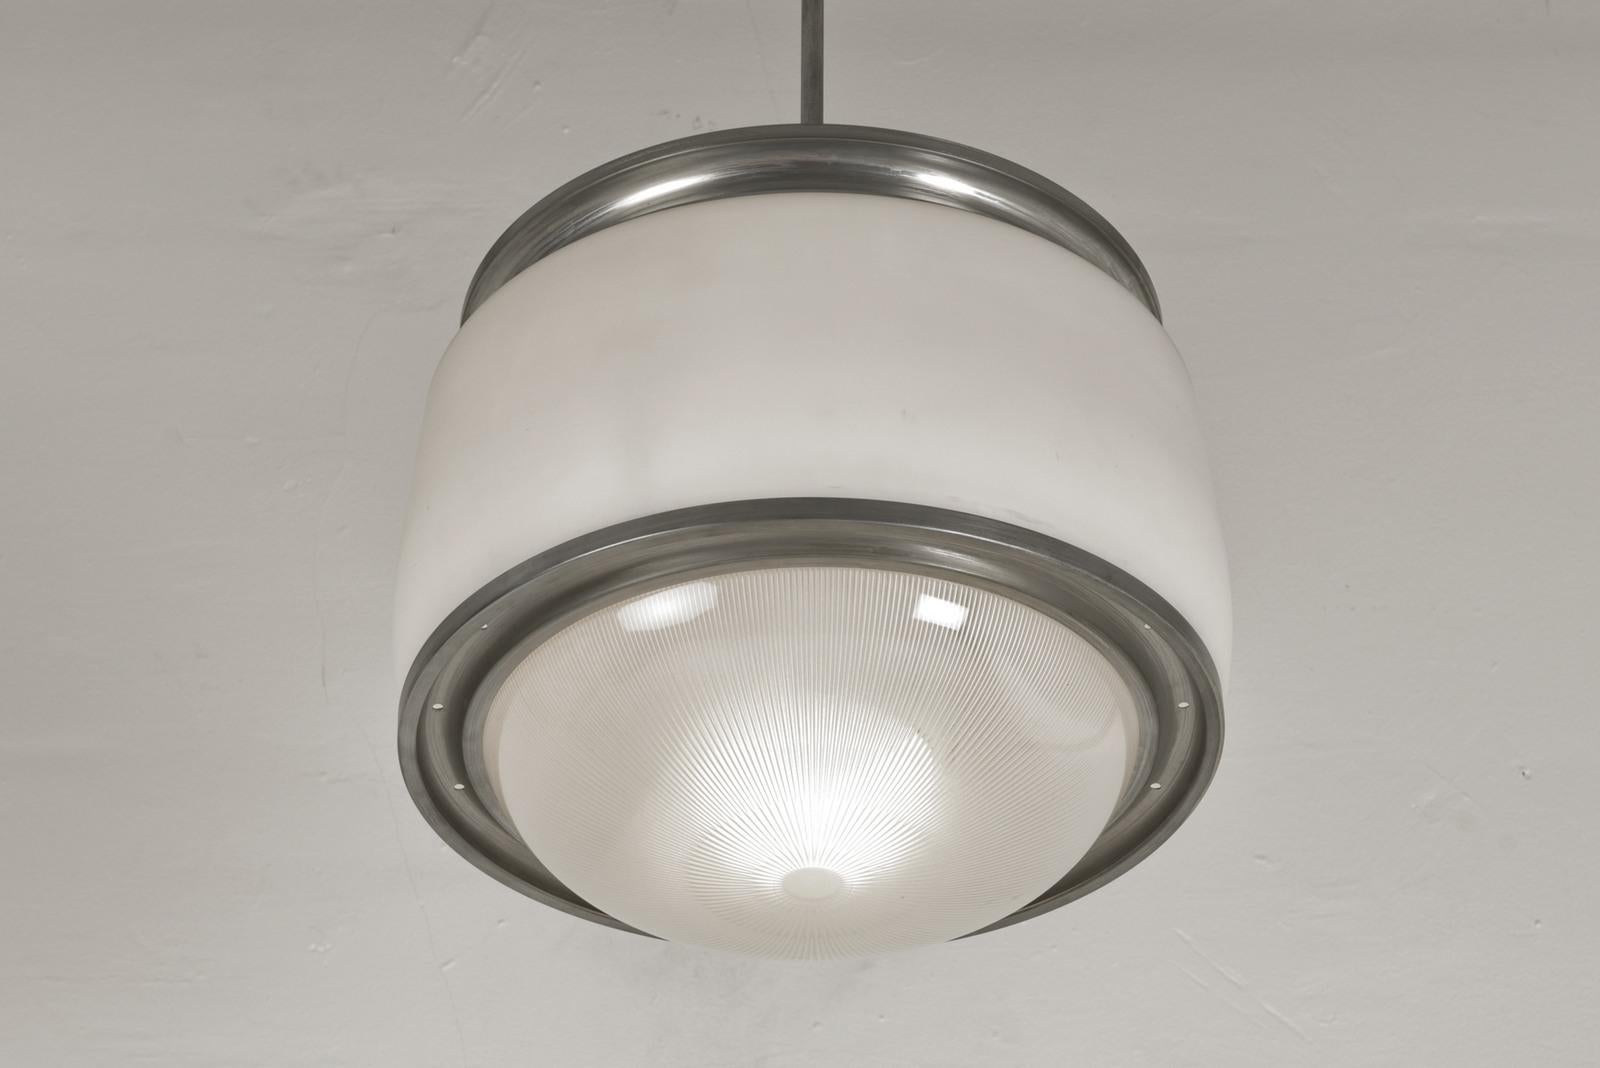 Mid-20th Century Pendant Lamp Kappa by Sergio Mazza for Artemide, Italy - 1960s For Sale